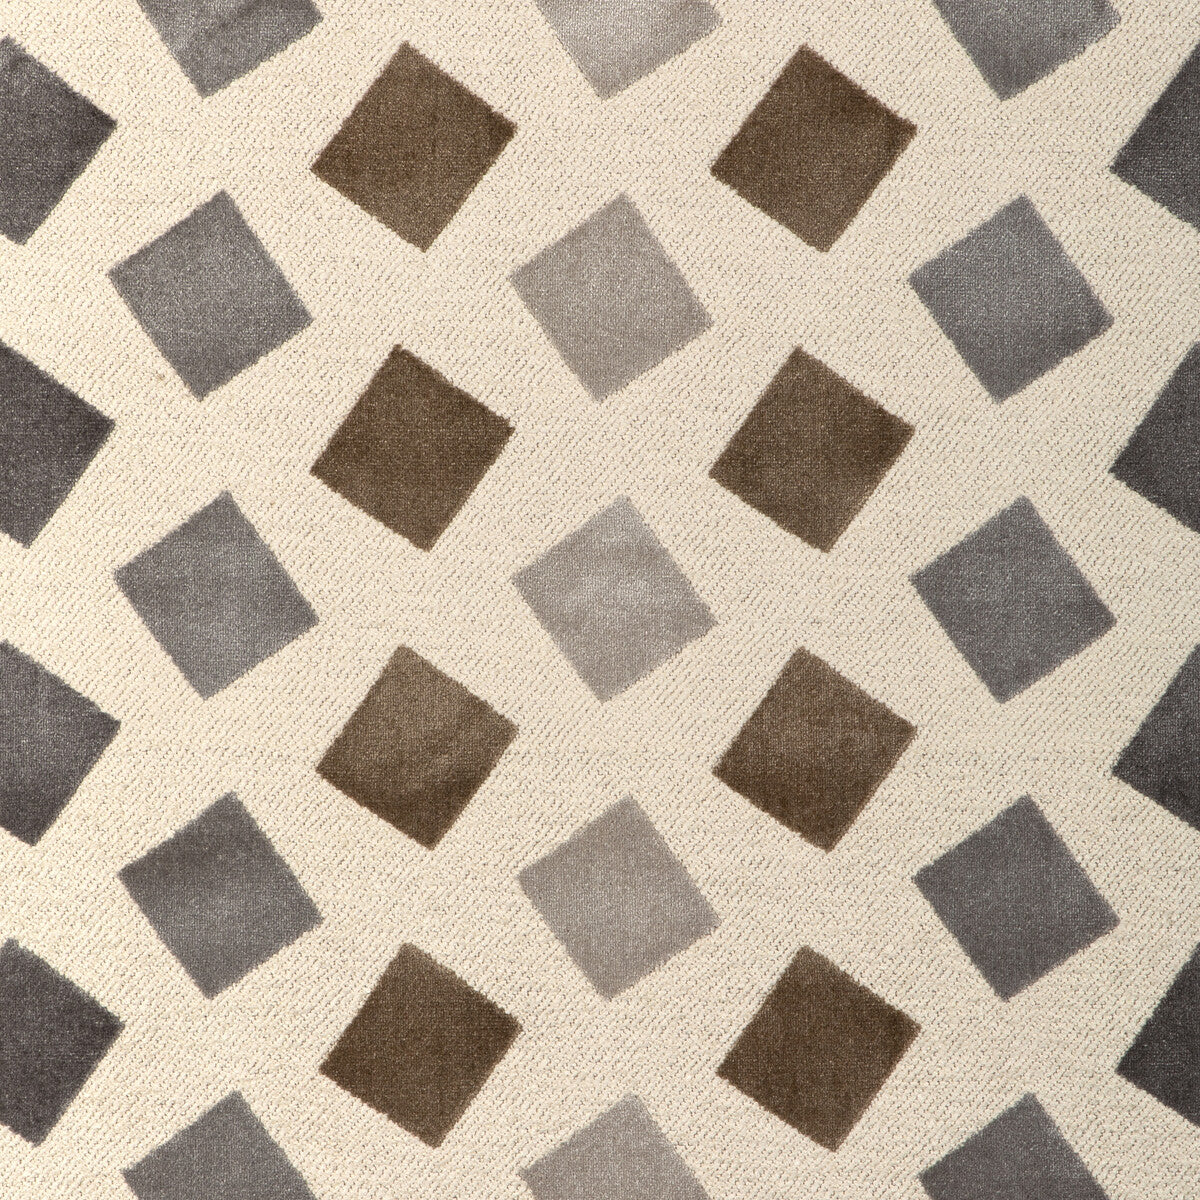 Kravet Design fabric in 36978-1611 color - pattern 36978.1611.0 - by Kravet Design in the Woven Colors collection